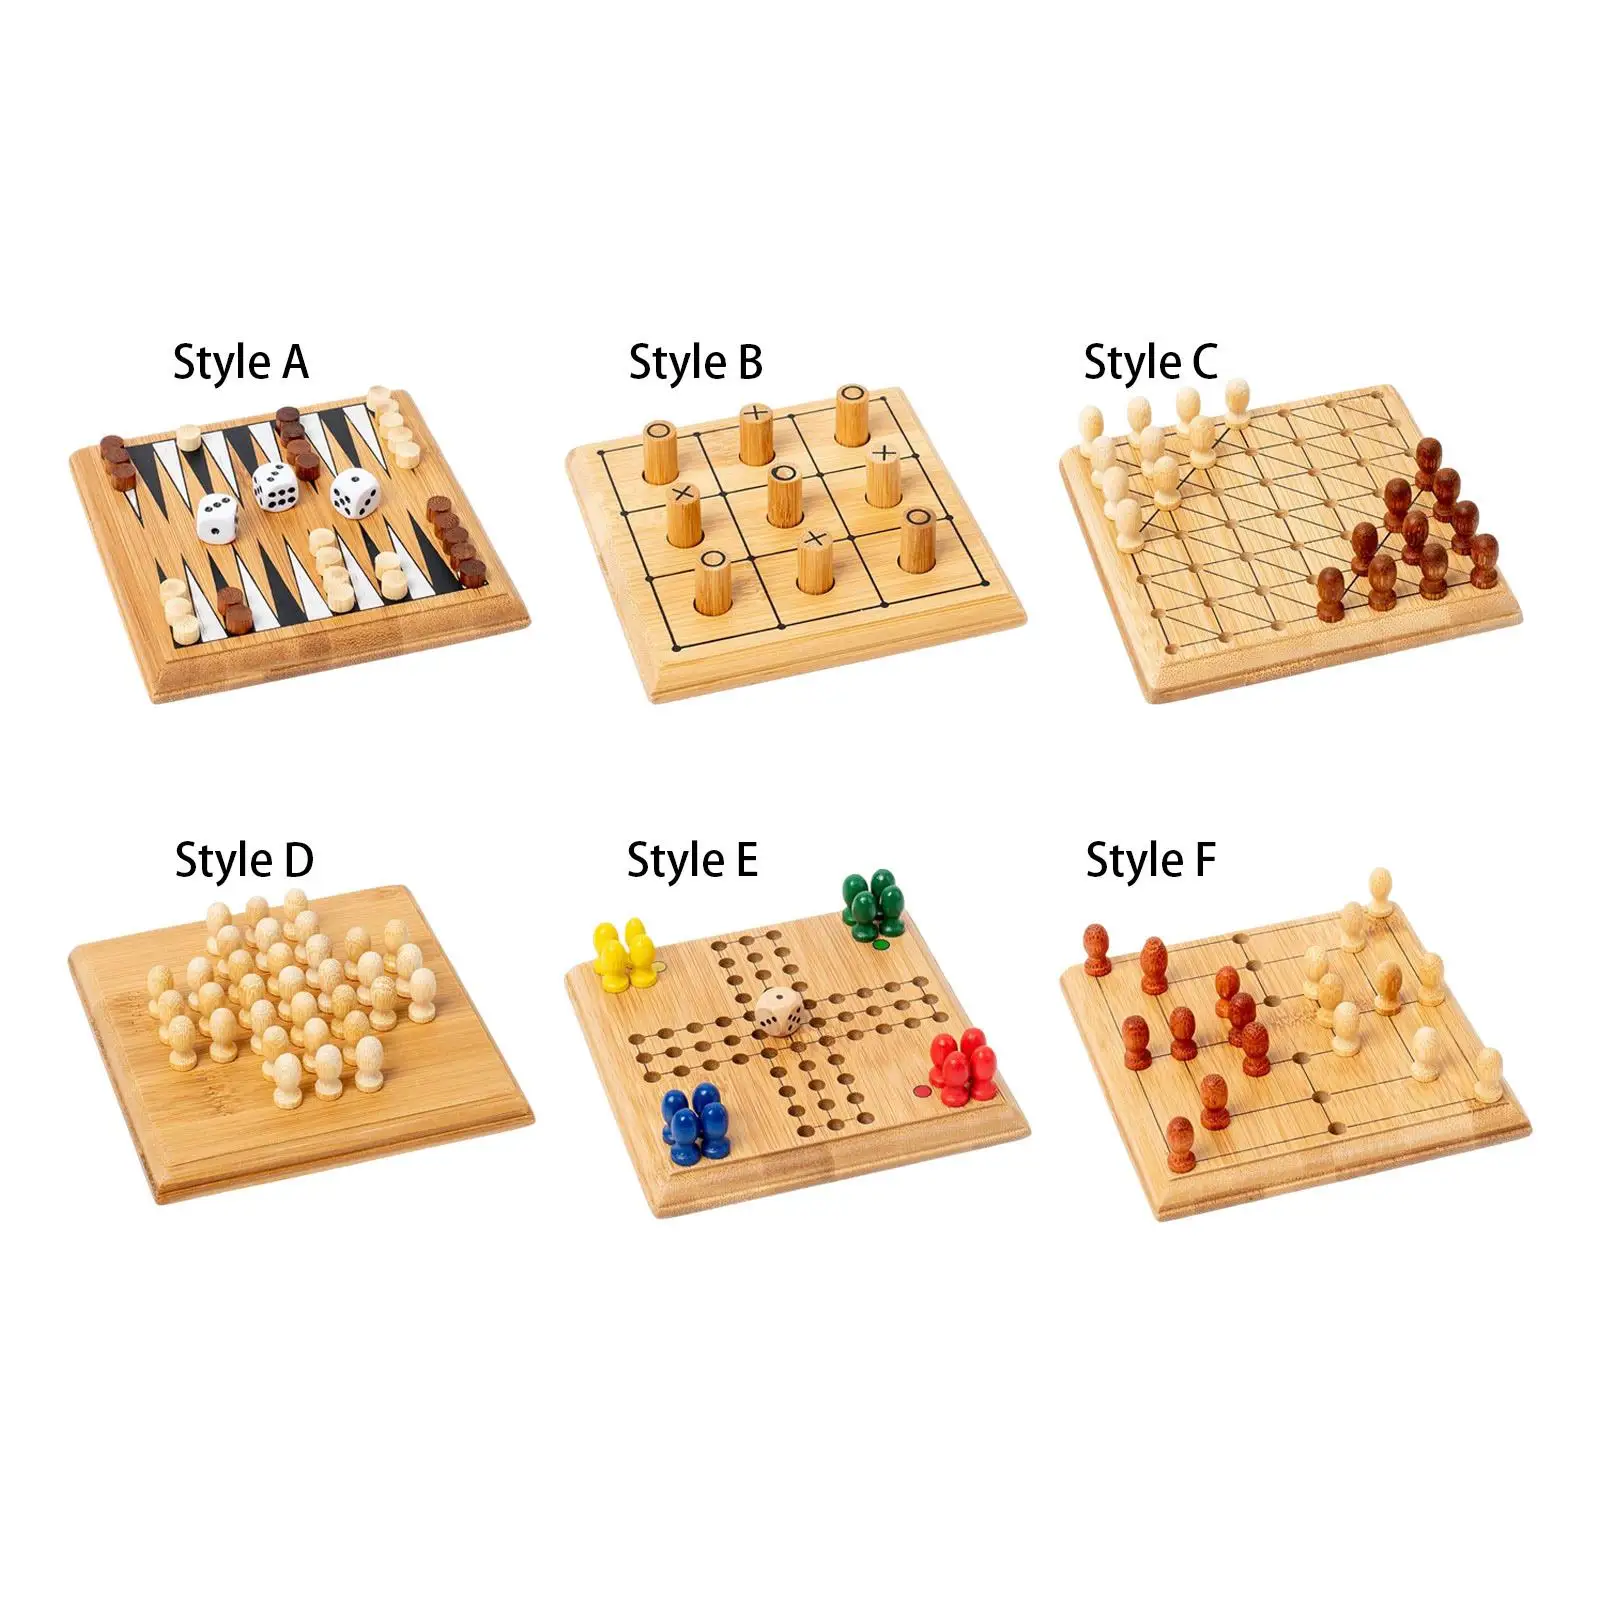 Portable Wooden Board Game with Game Pieces Cognitive Ability Toy Strategy Game Educational Toys for Adults Party